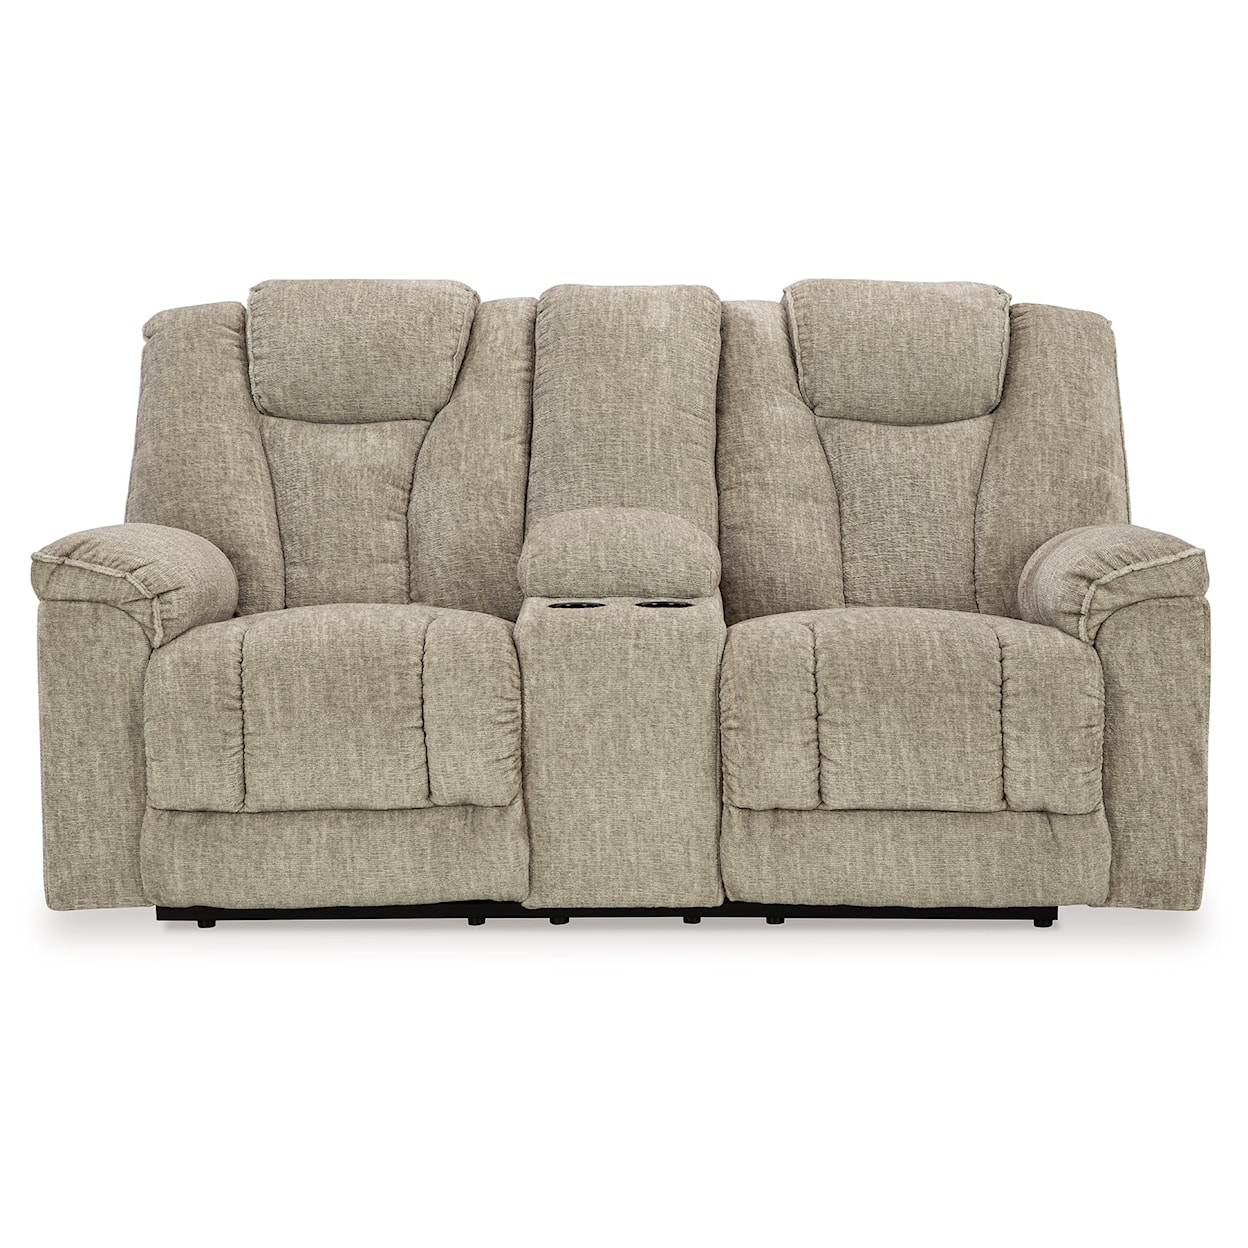 Ashley Furniture Signature Design Hindmarsh Power Reclining Loveseat With Console